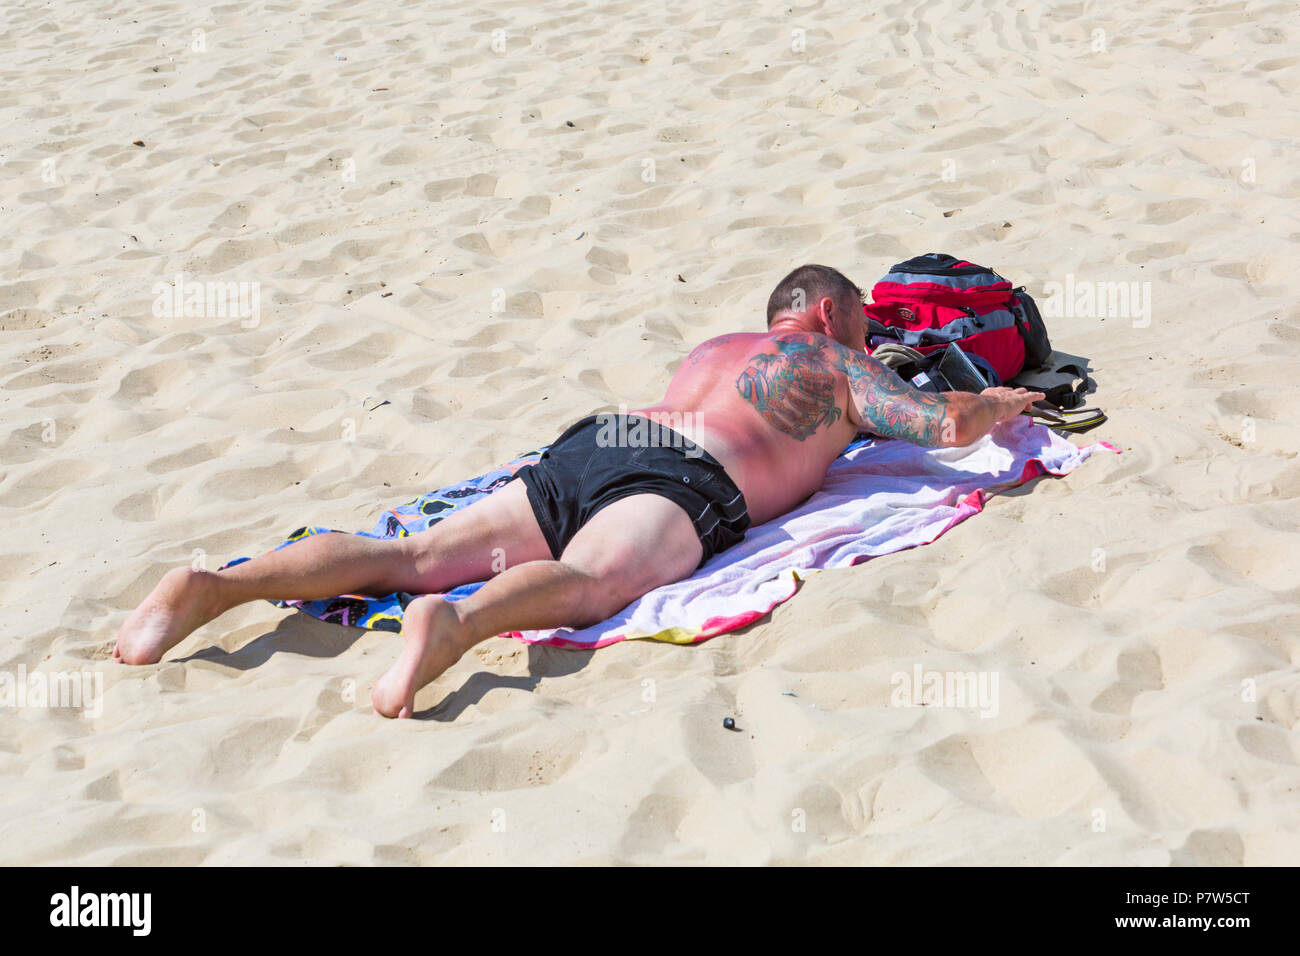 Bournemouth, Dorset, UK. 8th July 2018. UK weather: another hot sunny day as the heatwave continues and thousands of sunseekers head to the  seaside to enjoy the sandy beaches at Bournemouth on the South Coast. A bit red - looks sore! Man with colourful tattoos tattoo on back and arm sunbathing on the beach getting sunburnt. Credit: Carolyn Jenkins/Alamy Live News Stock Photo